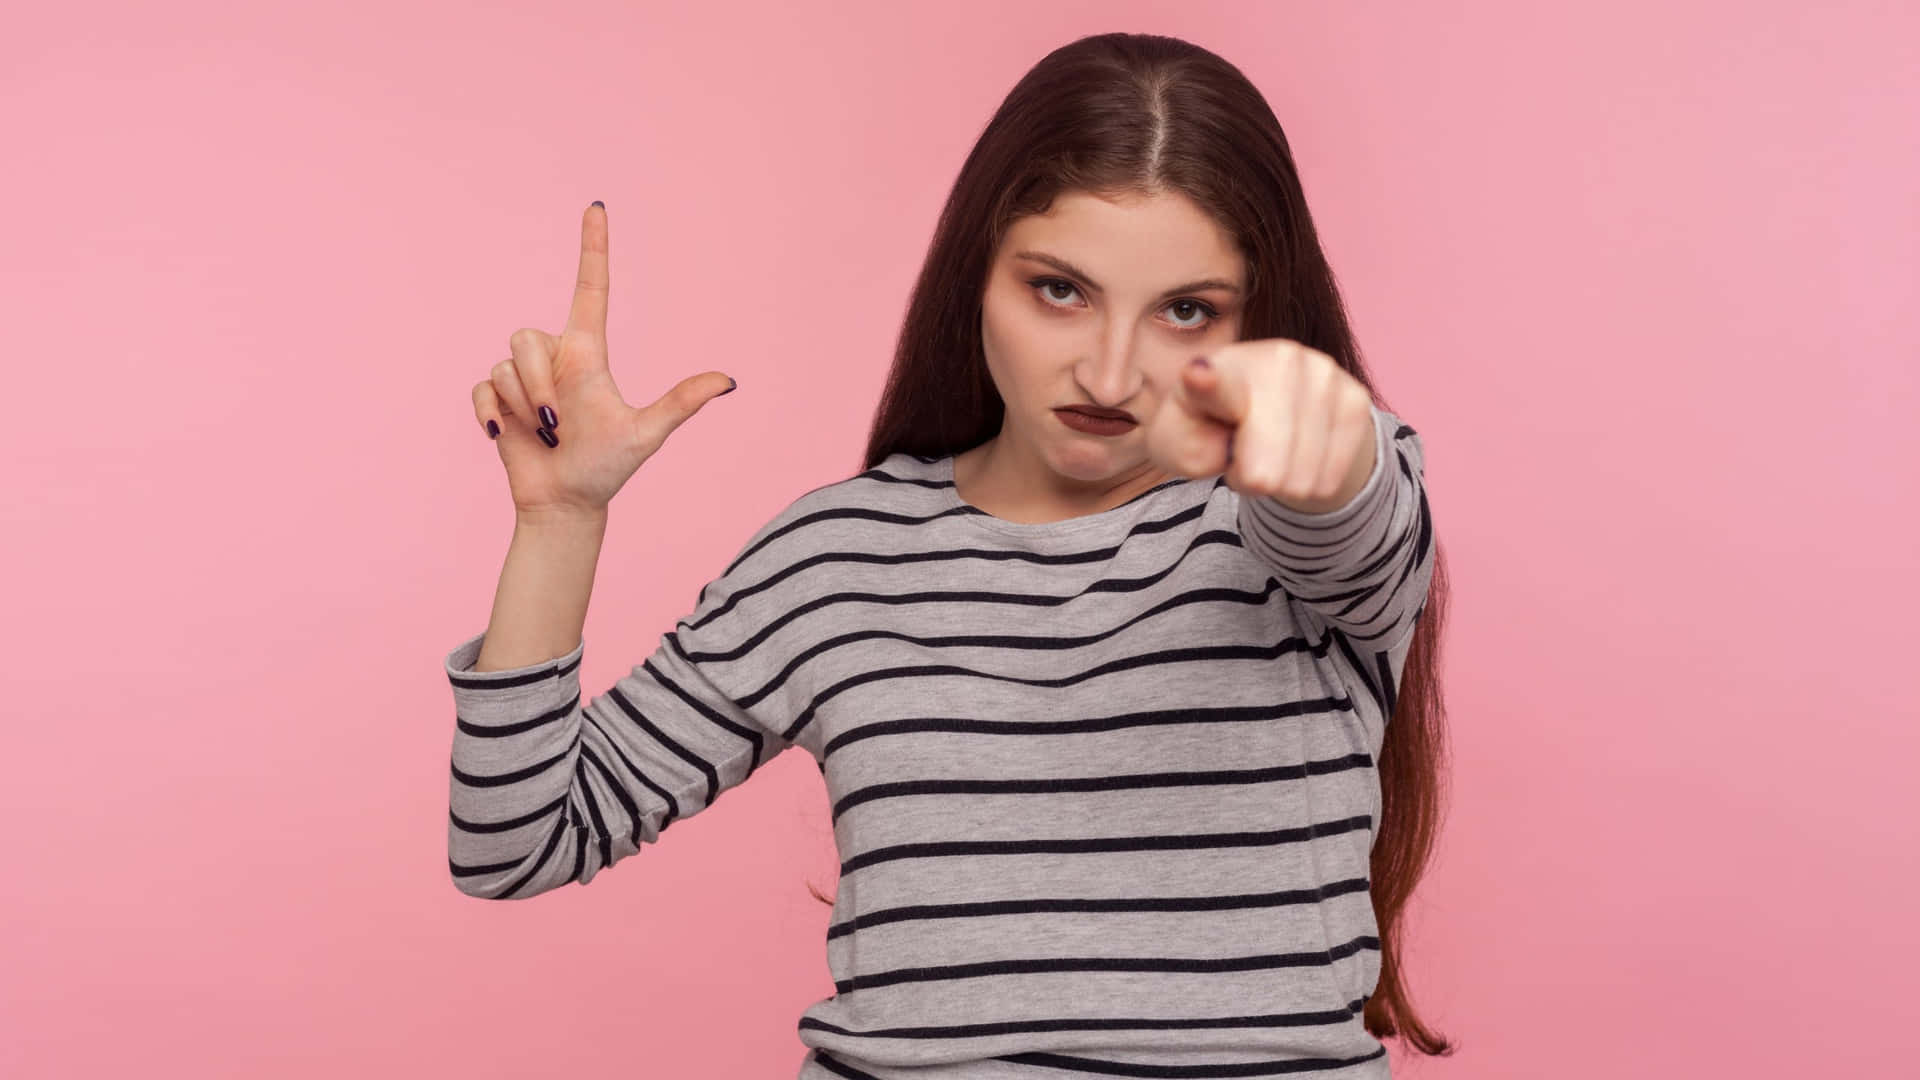 Woman Pointing Finger Gesture Pink Background Wallpaper